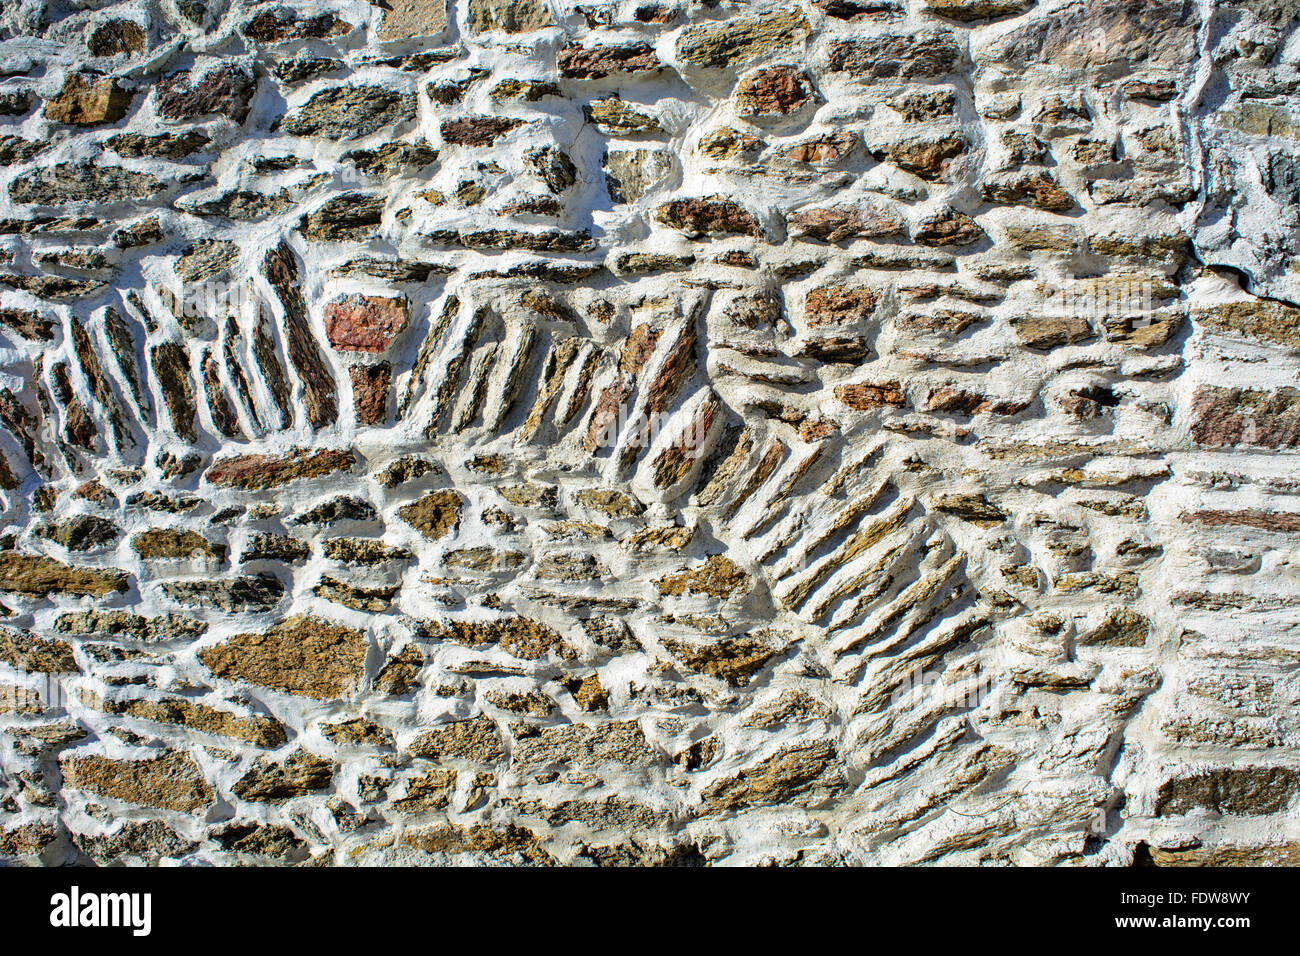 Stone spikes protruding from the wall. Stock Photo